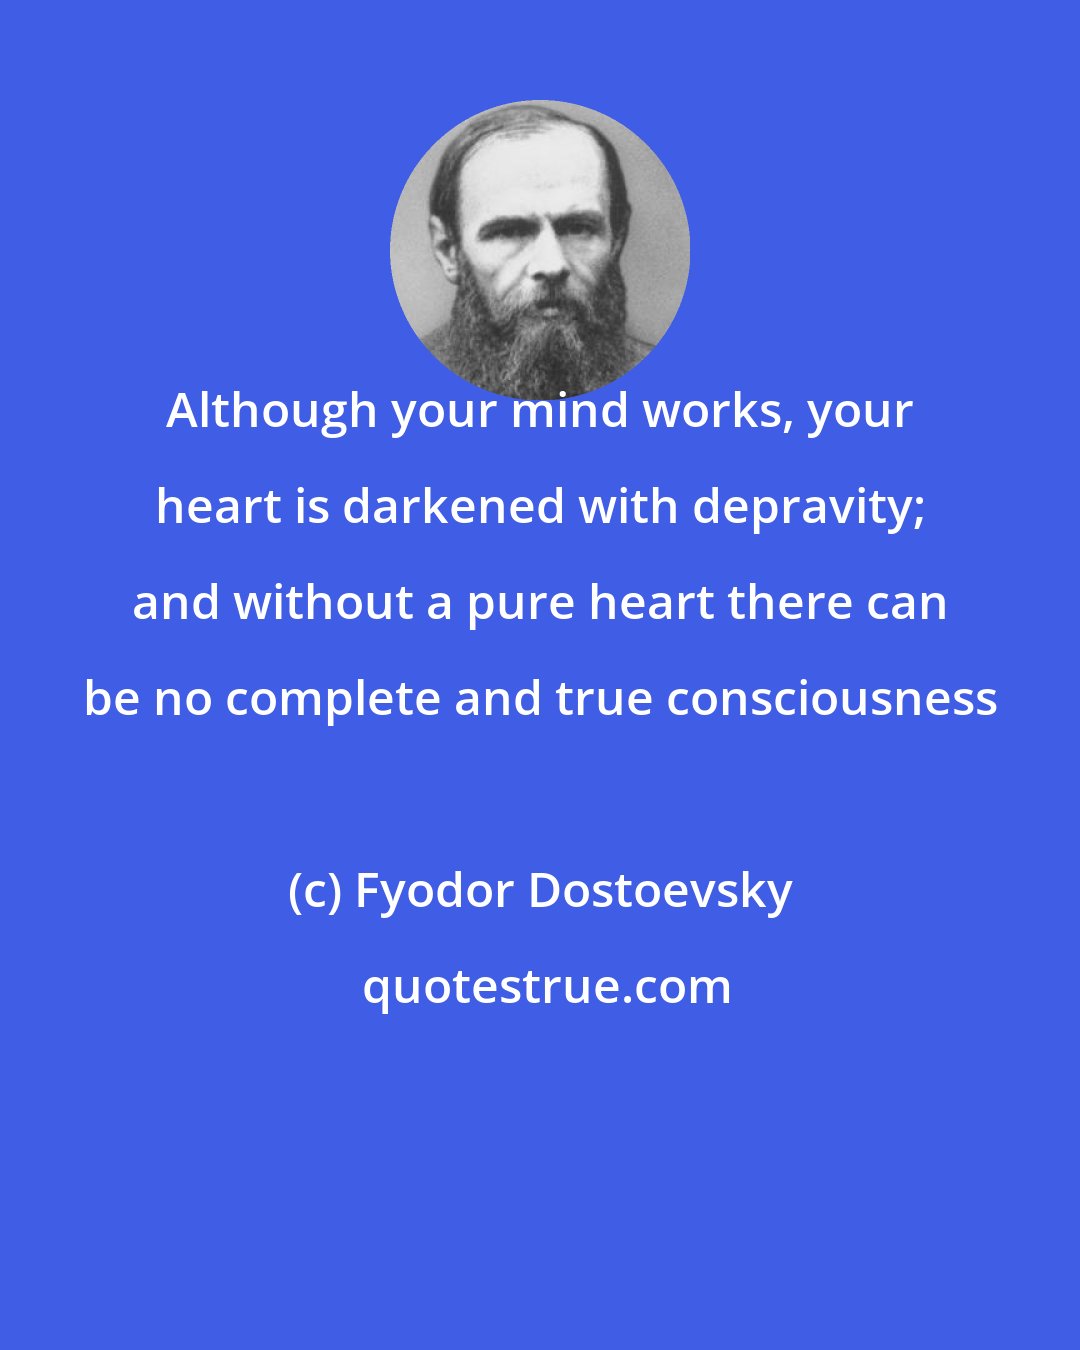 Fyodor Dostoevsky: Although your mind works, your heart is darkened with depravity; and without a pure heart there can be no complete and true consciousness